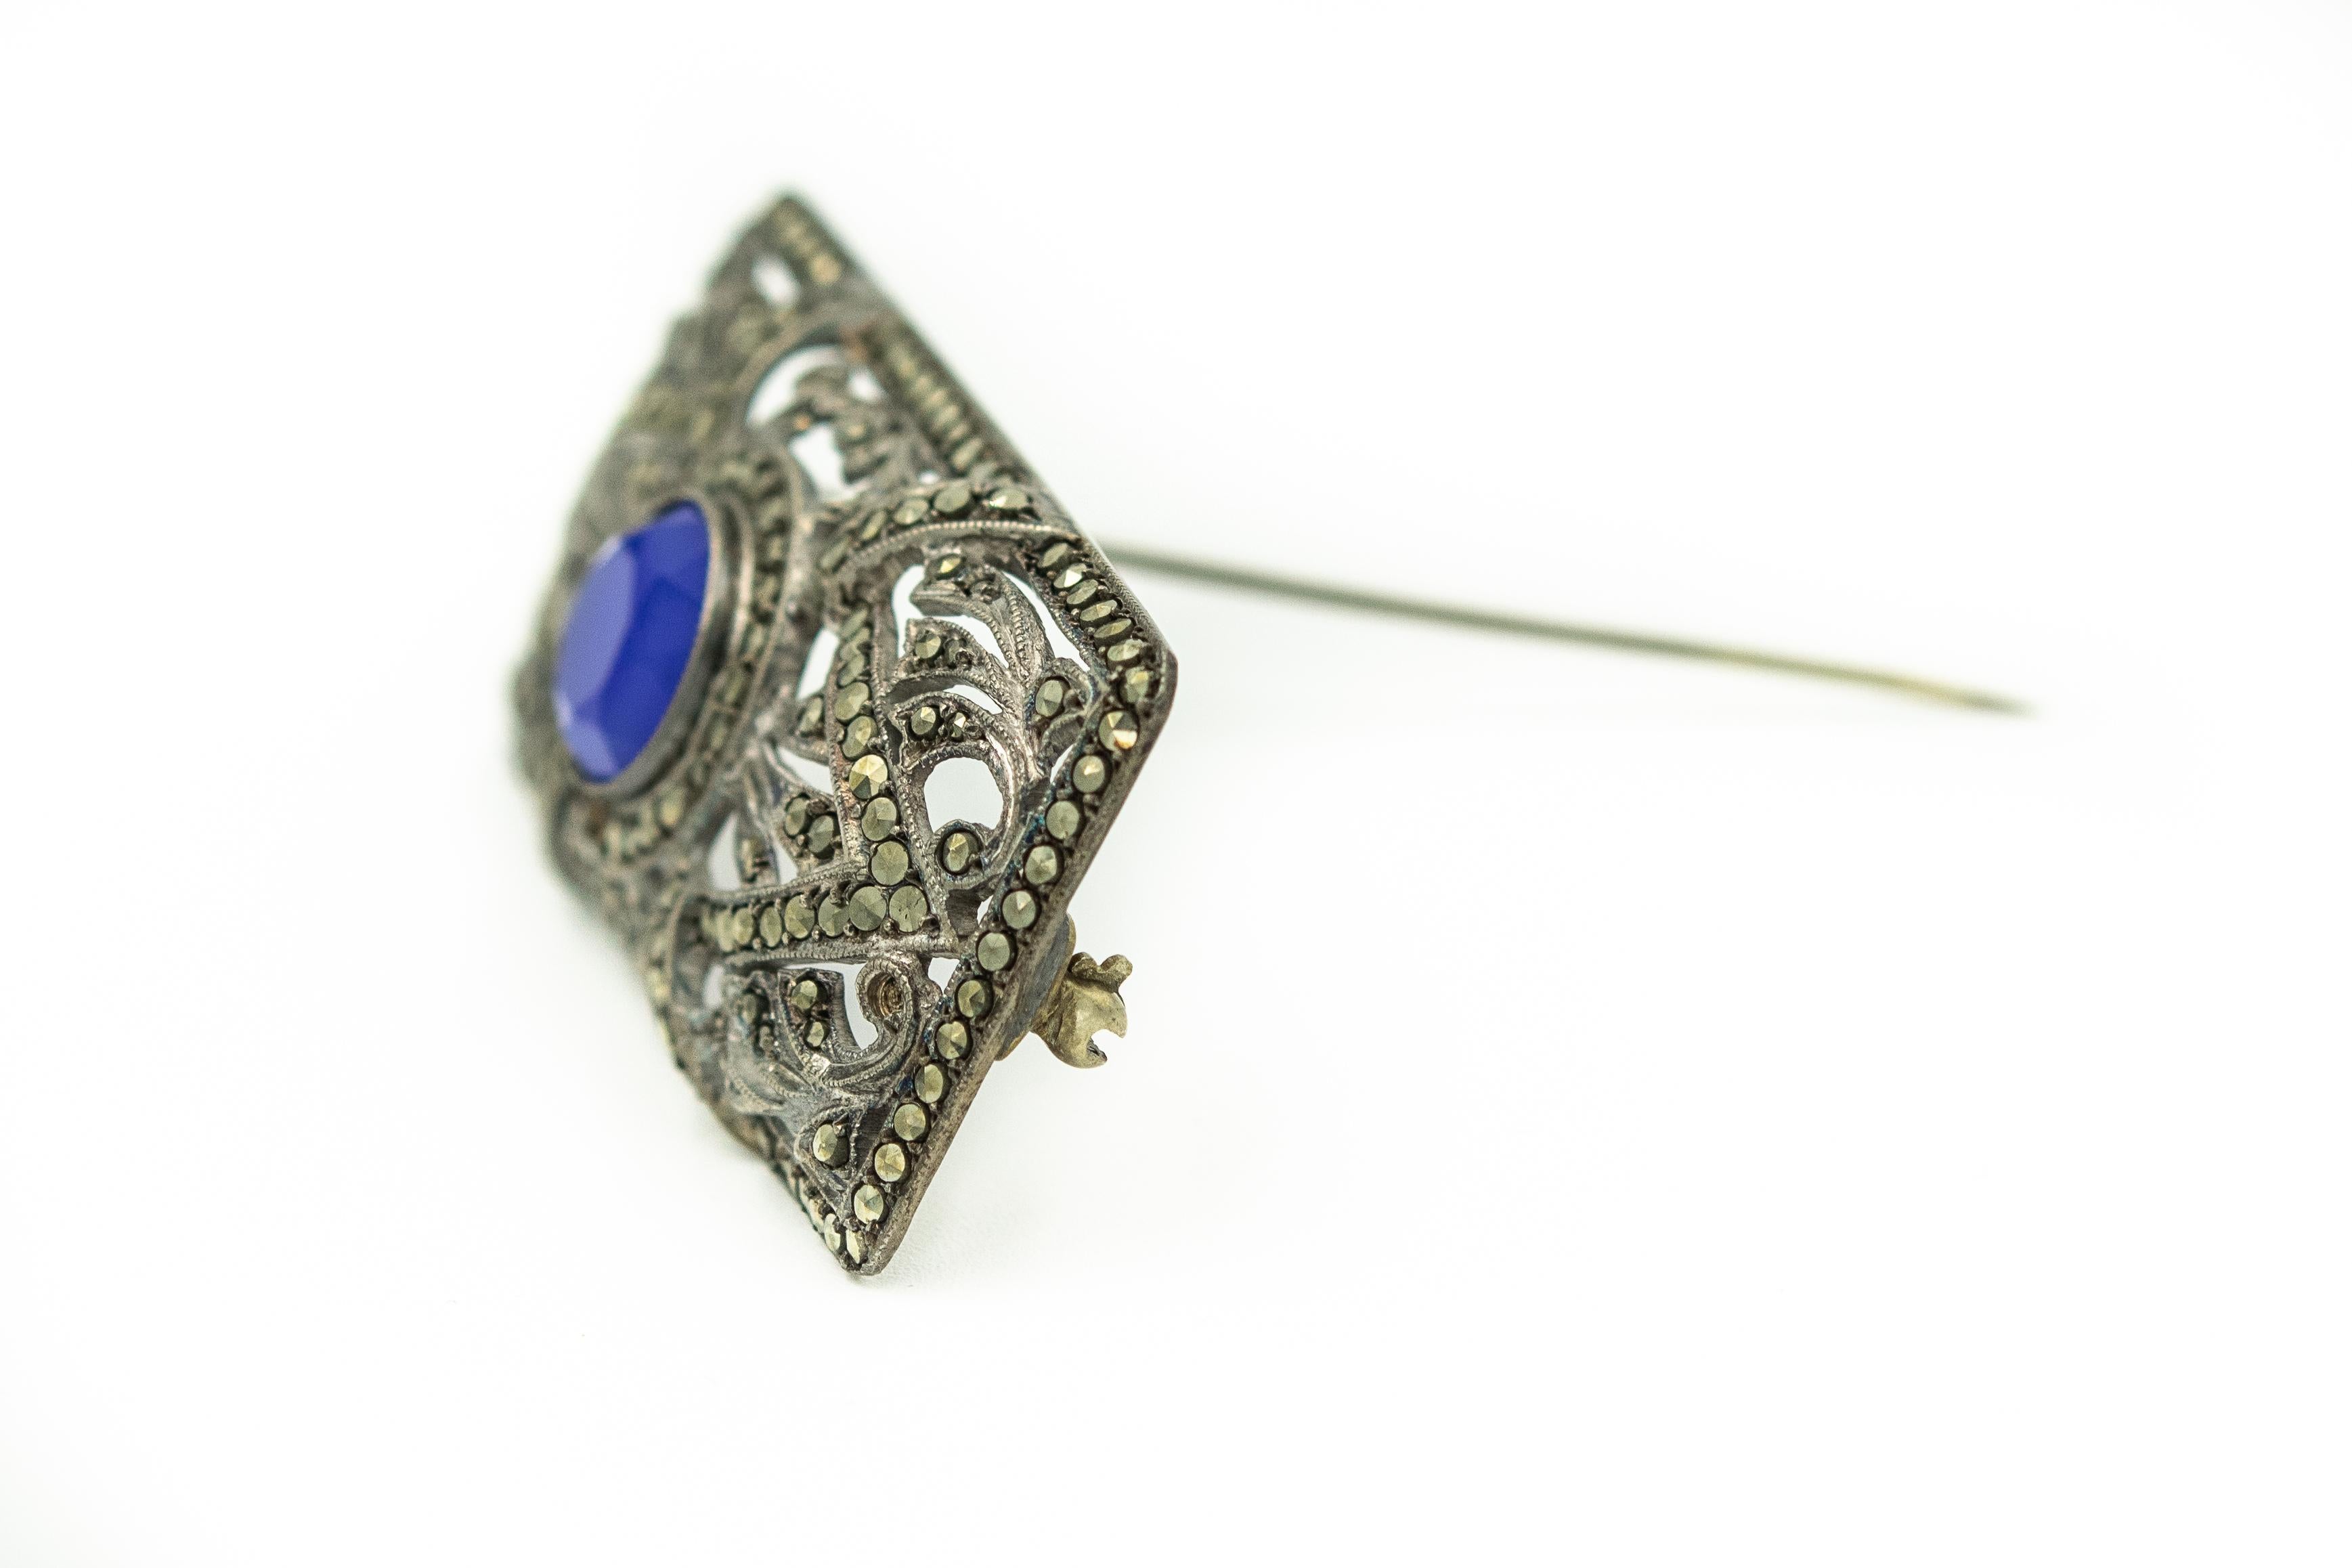 Art Deco rectangular brooch featuring a filagree openwork design with a blue glass stone in the center.  

It is marked 935 silver probably German (normal sterling silver is 925 so this is a higher purity)